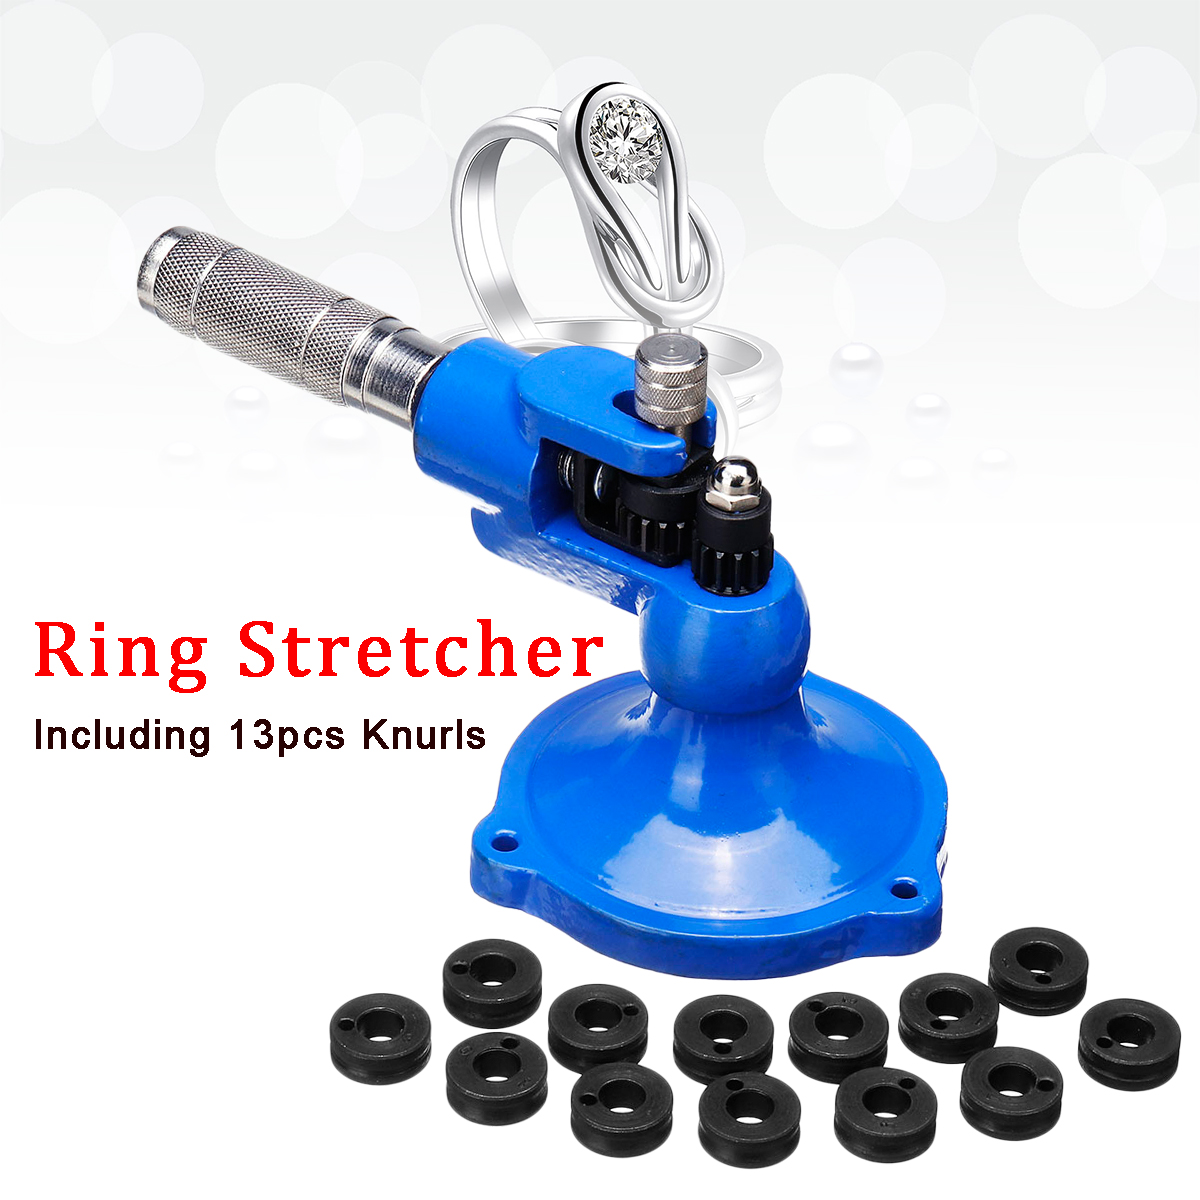 Ring-Stretcher-Expander-Enlarger-For-Stone-Set-Jewelry-Craft-Making-Tools-w-13-Knurls-1404997